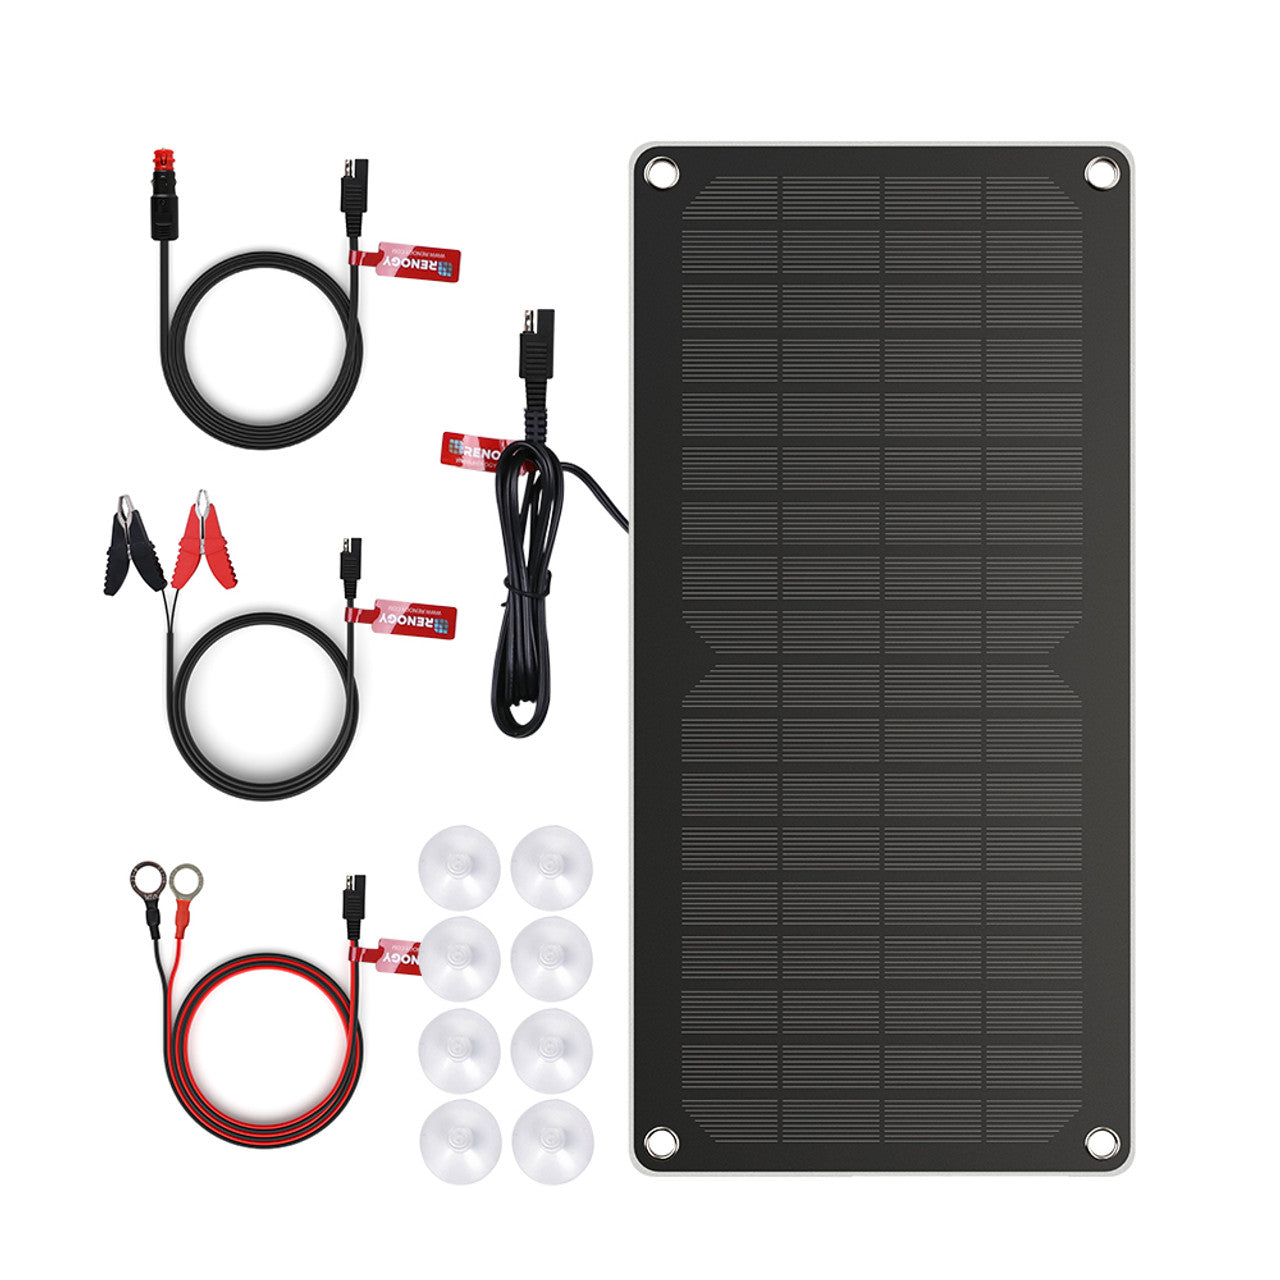 10W Solar Battery Charger